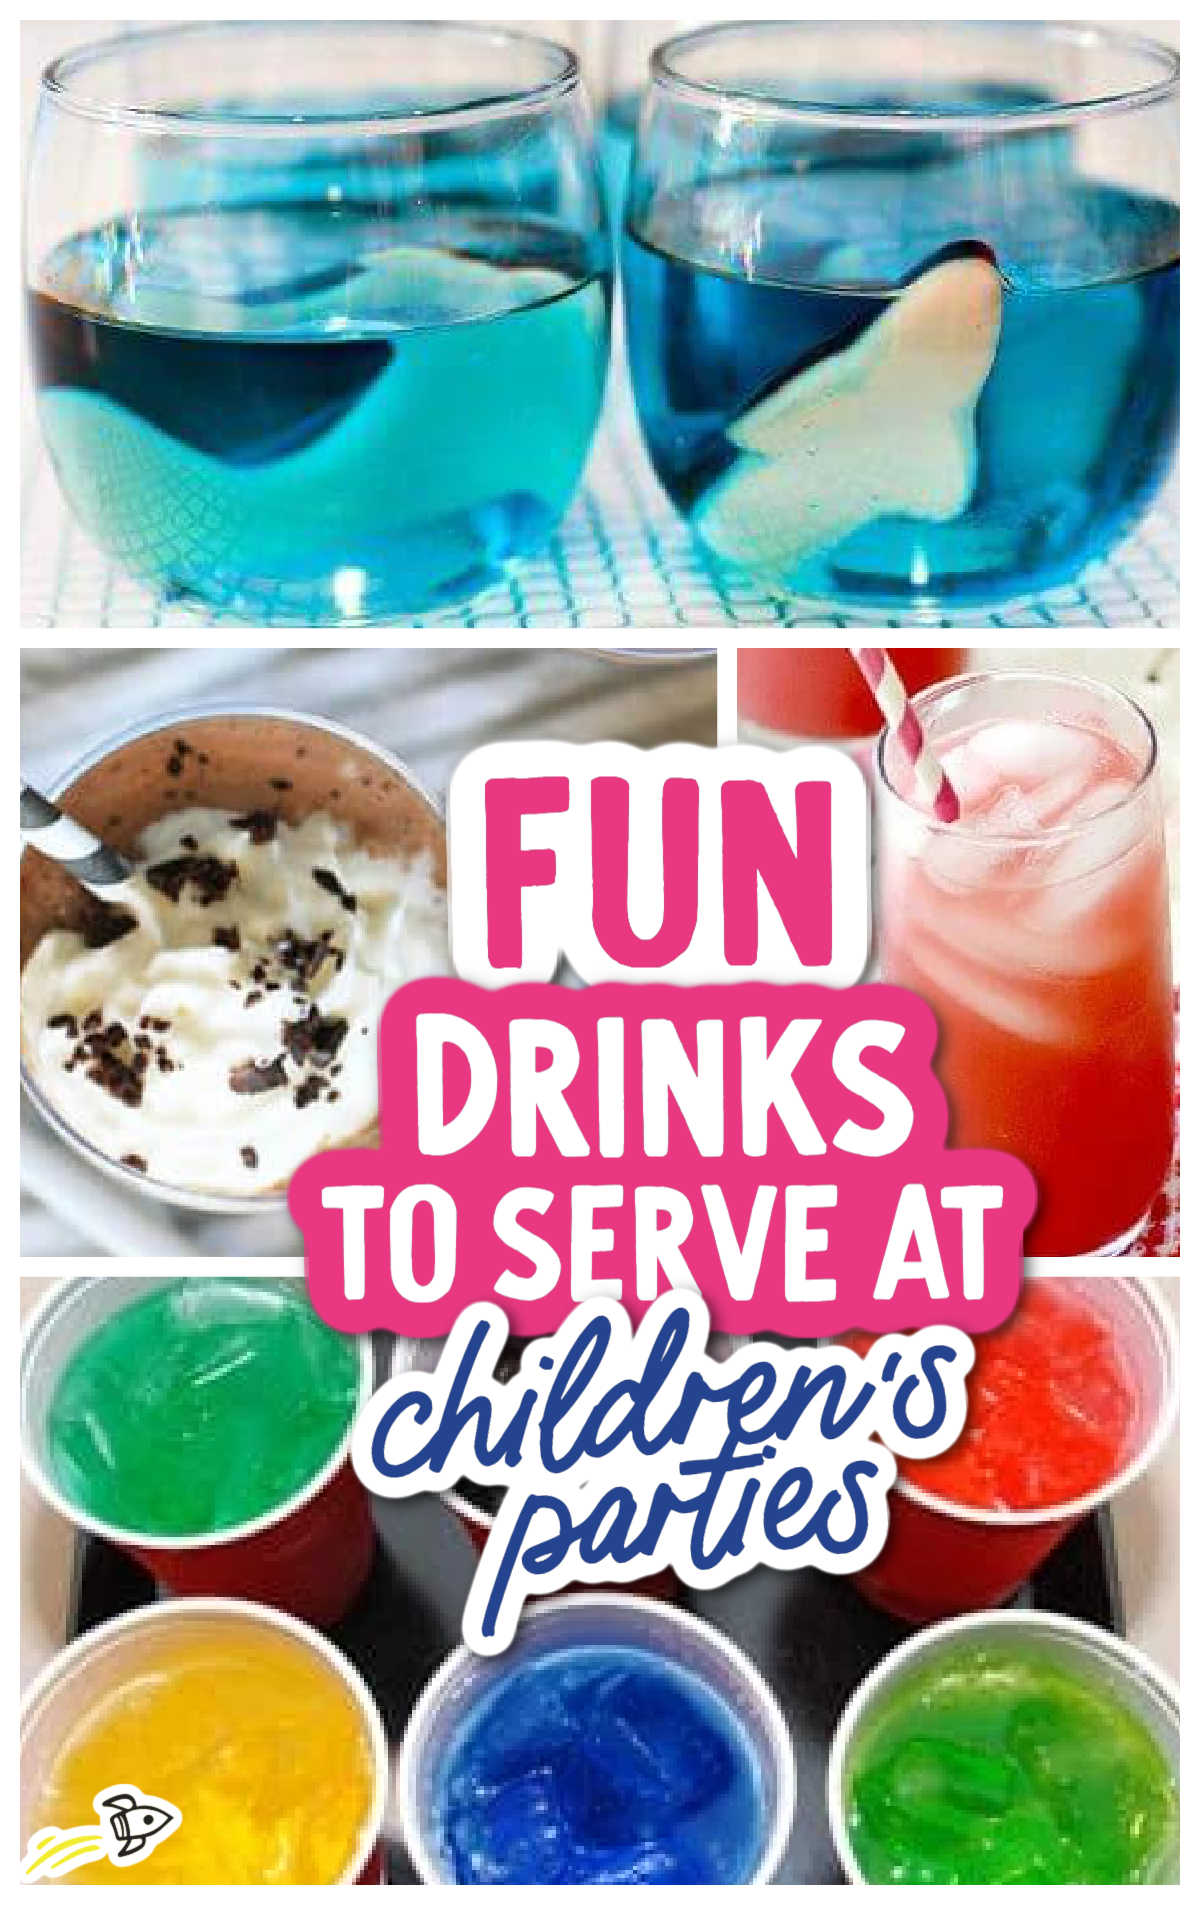 31 Fun Drinks To Serve At Children's Parties (Non-alcohol